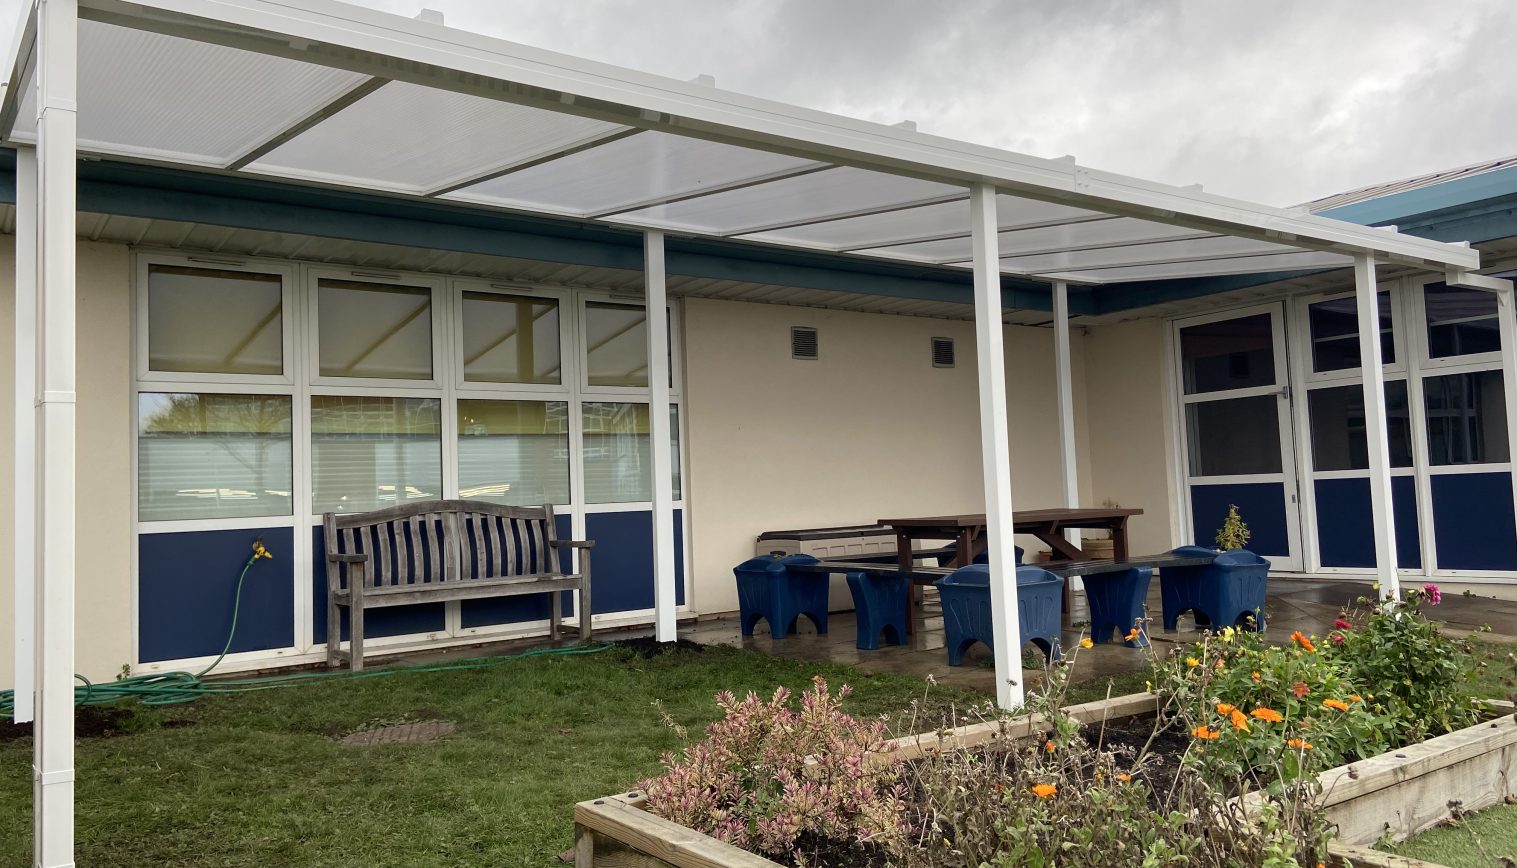 The Brier School – Wall Mounted Canopies